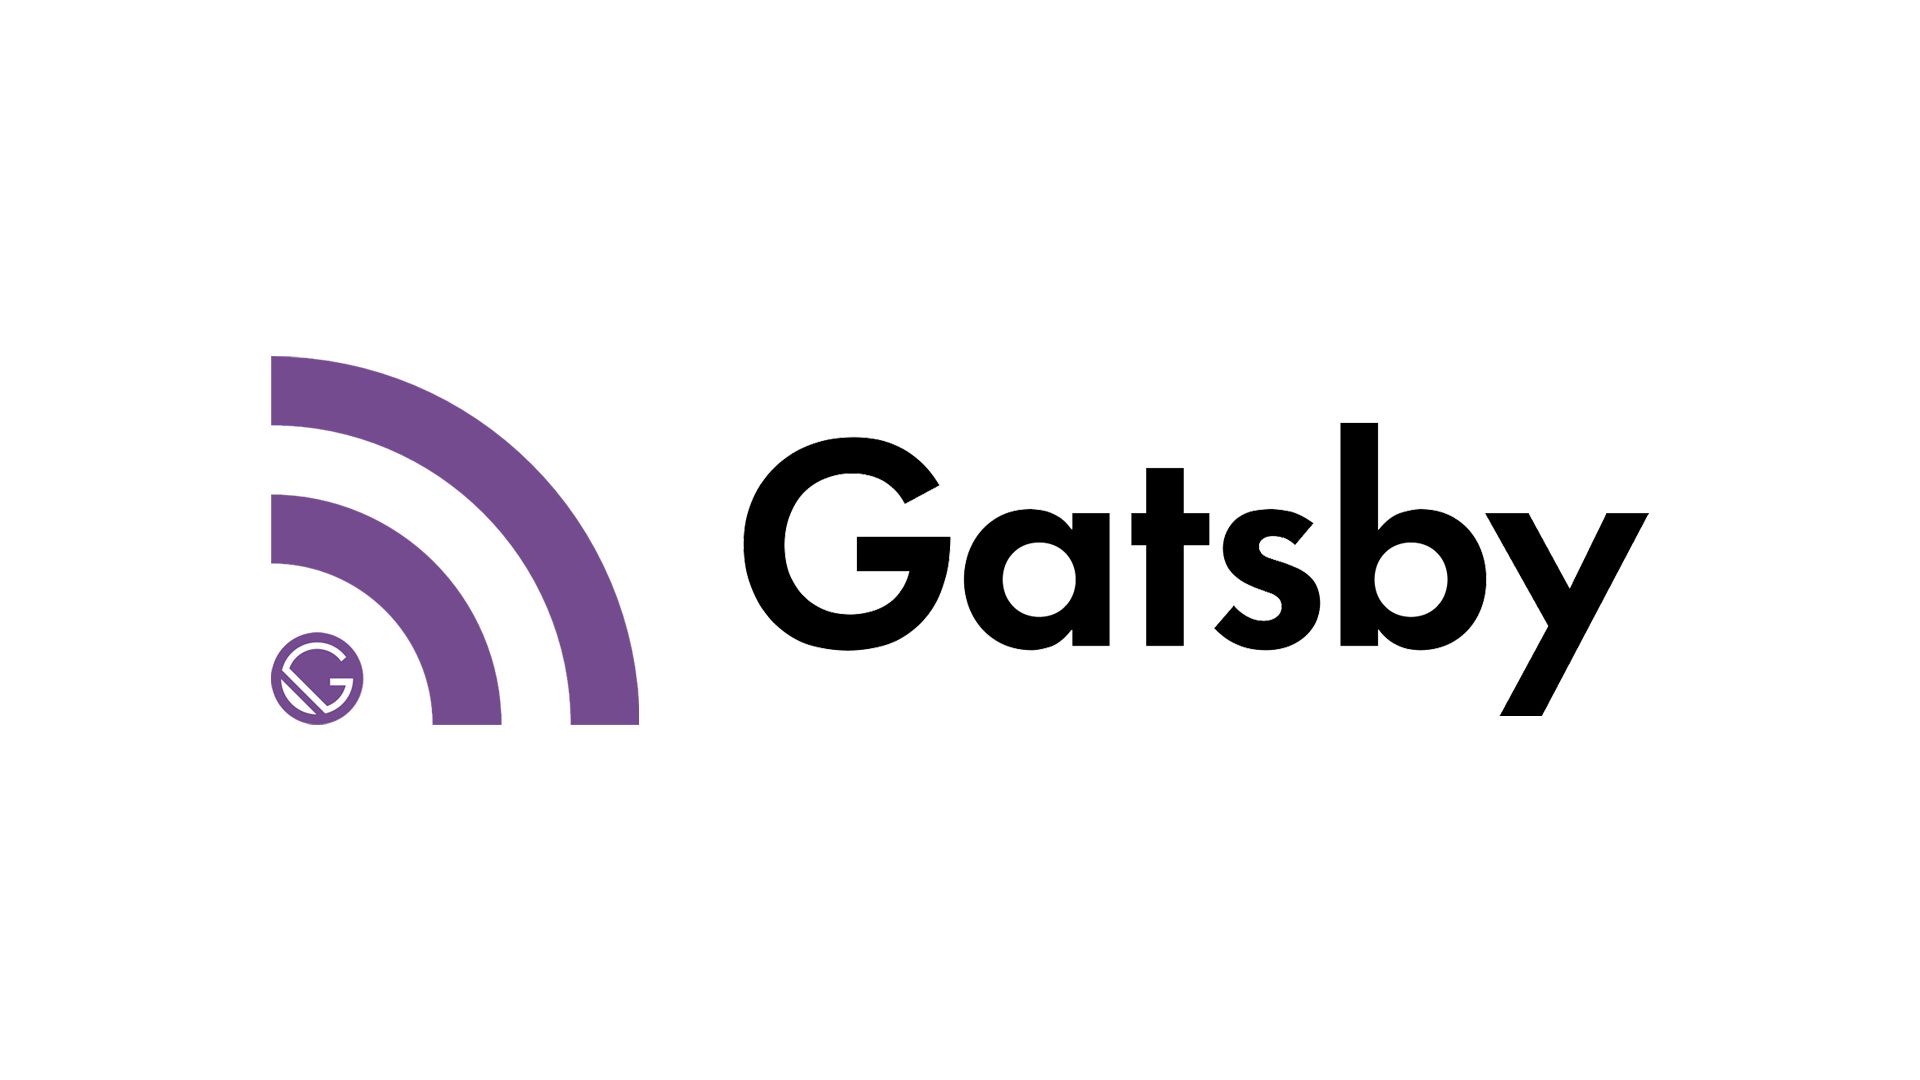 How to Automatically Cross-post from Your GatsbyJS Blog with RSS